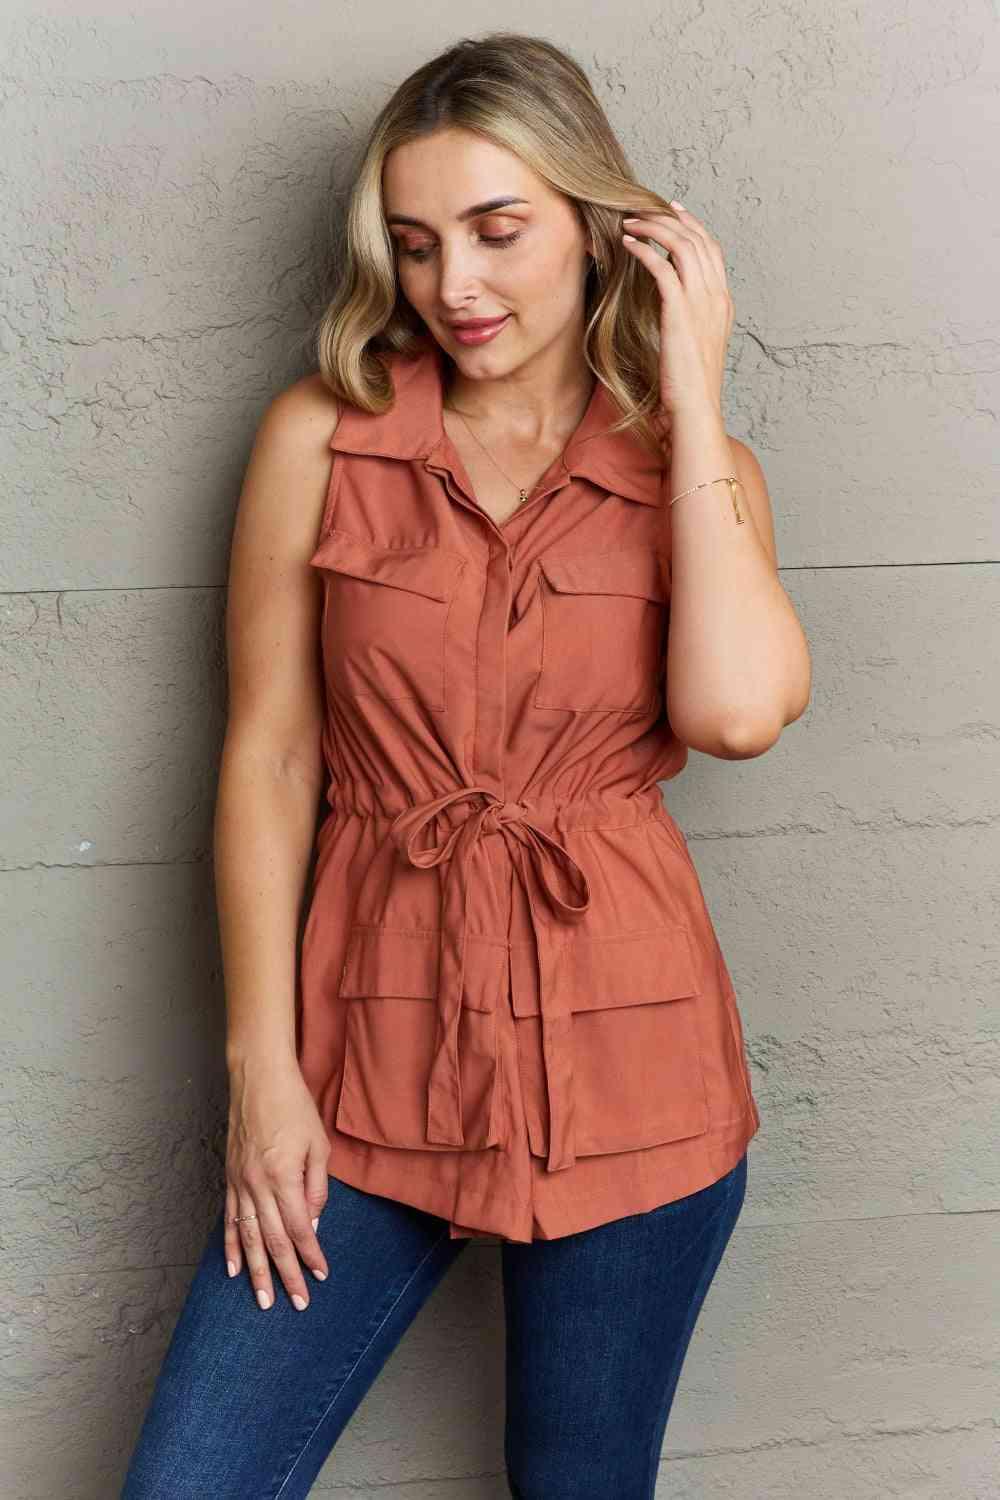 Ninexis Follow The Light Sleeveless Collared Button Down Top - Immenzive